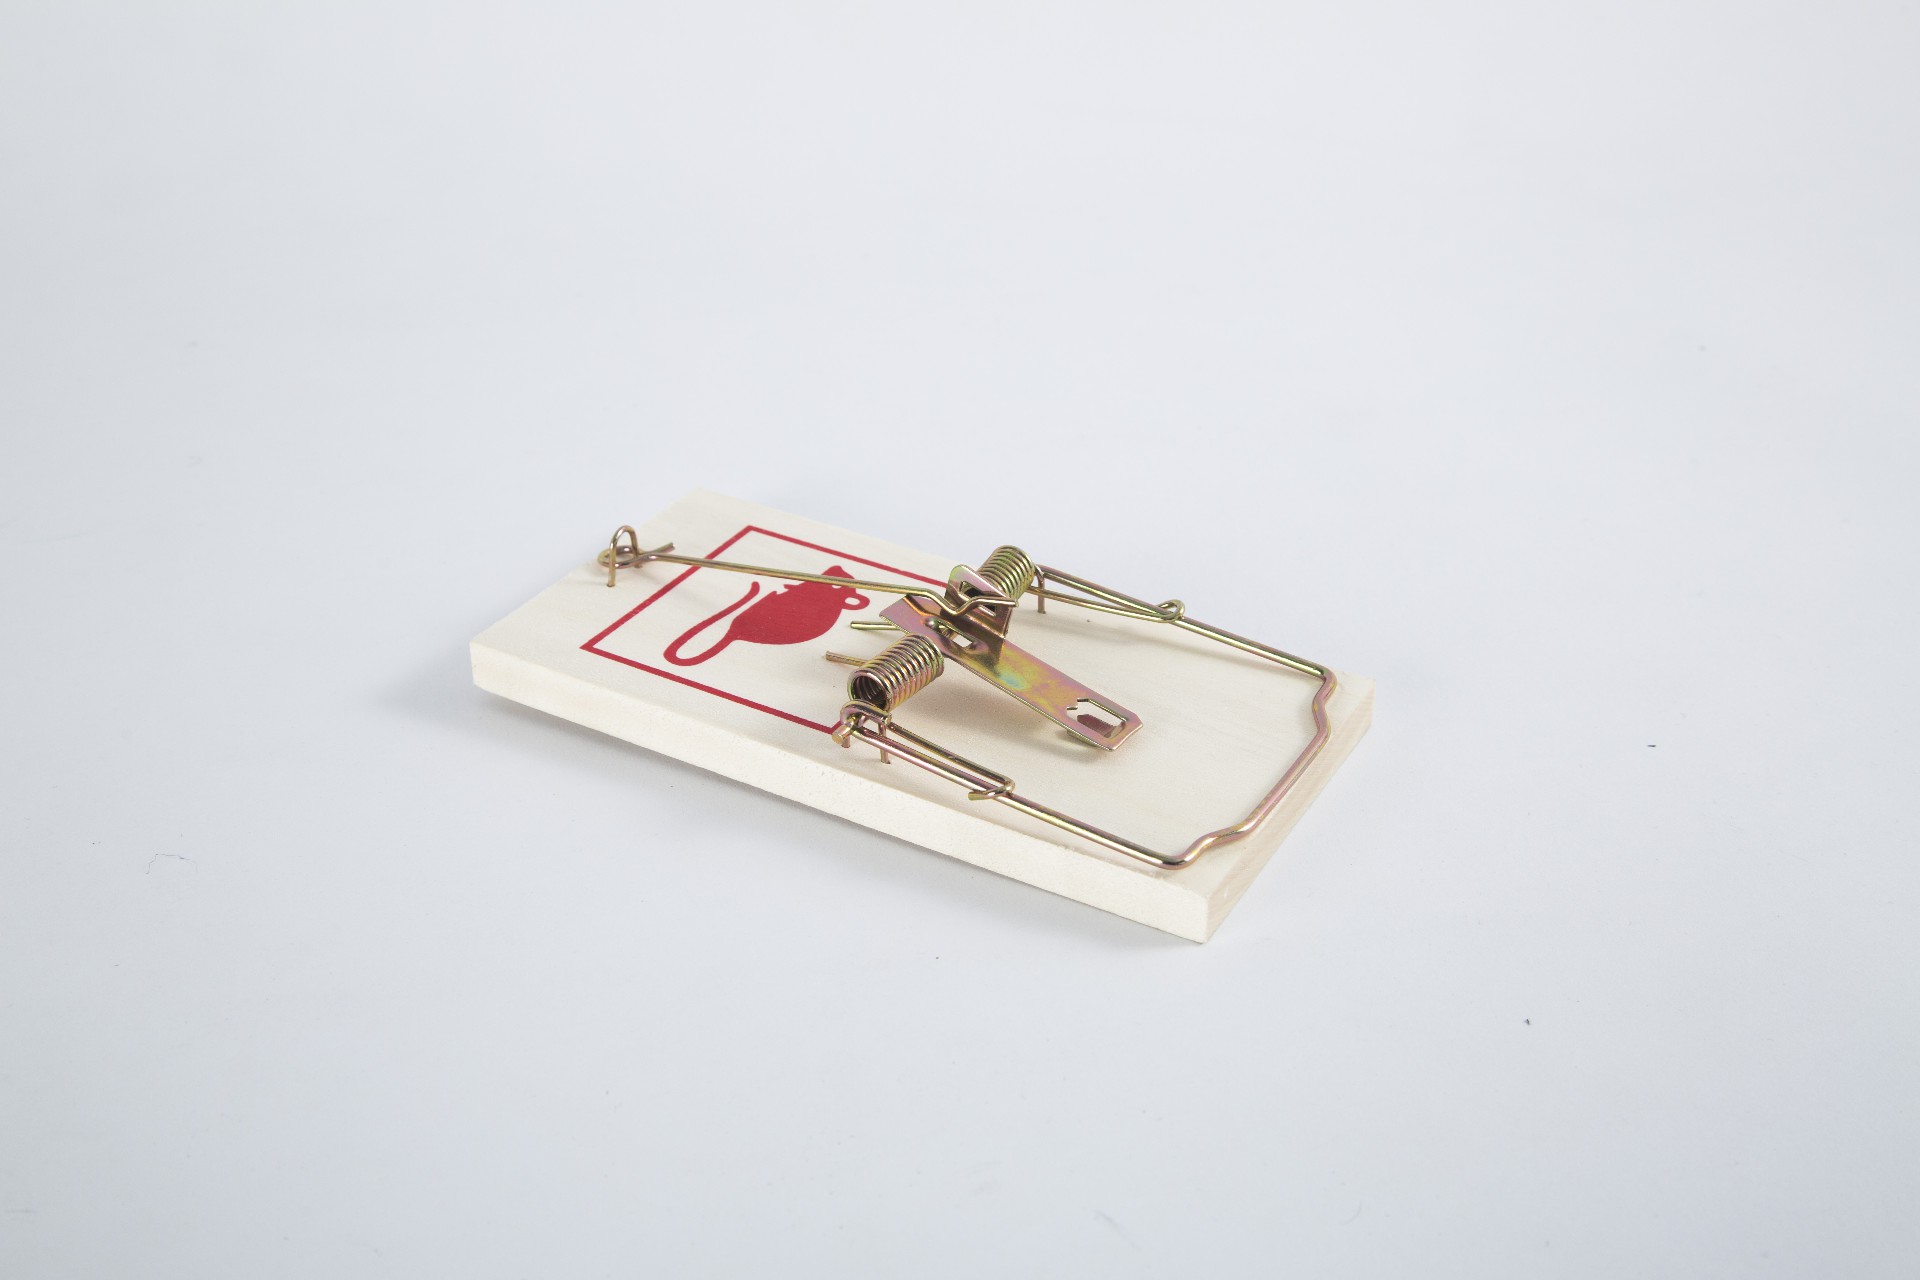 Wooden mouse trap-Wenzhou Huanting Environmental Protection